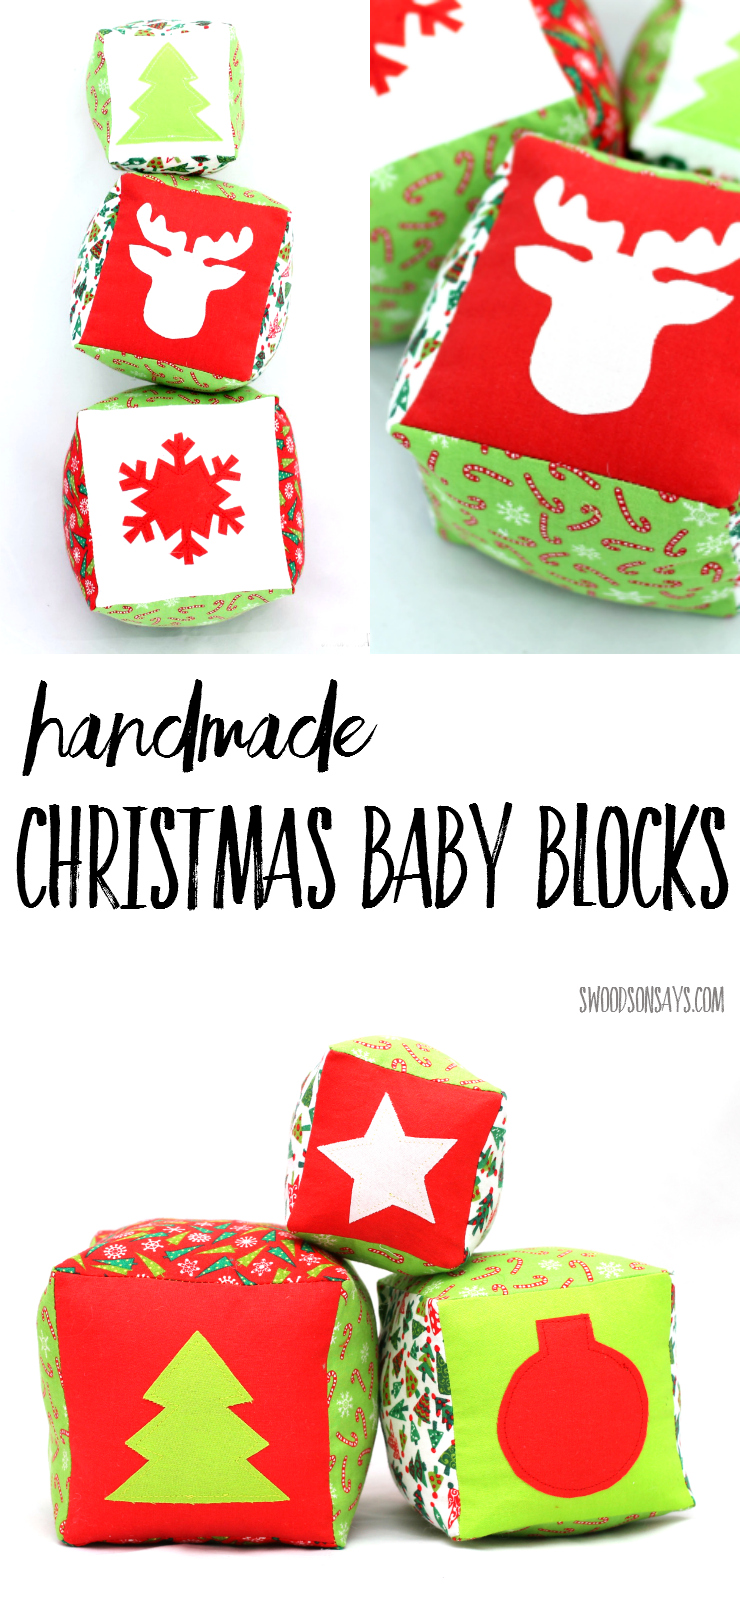 Sew up some Christmas Baby Blocks for the little one in your life! This is a sewing pattern perfect for scraps; there are 3 different sized blocks with 7 different designs and photo instructions for how to sew them. fun first Christmas toy to sew!